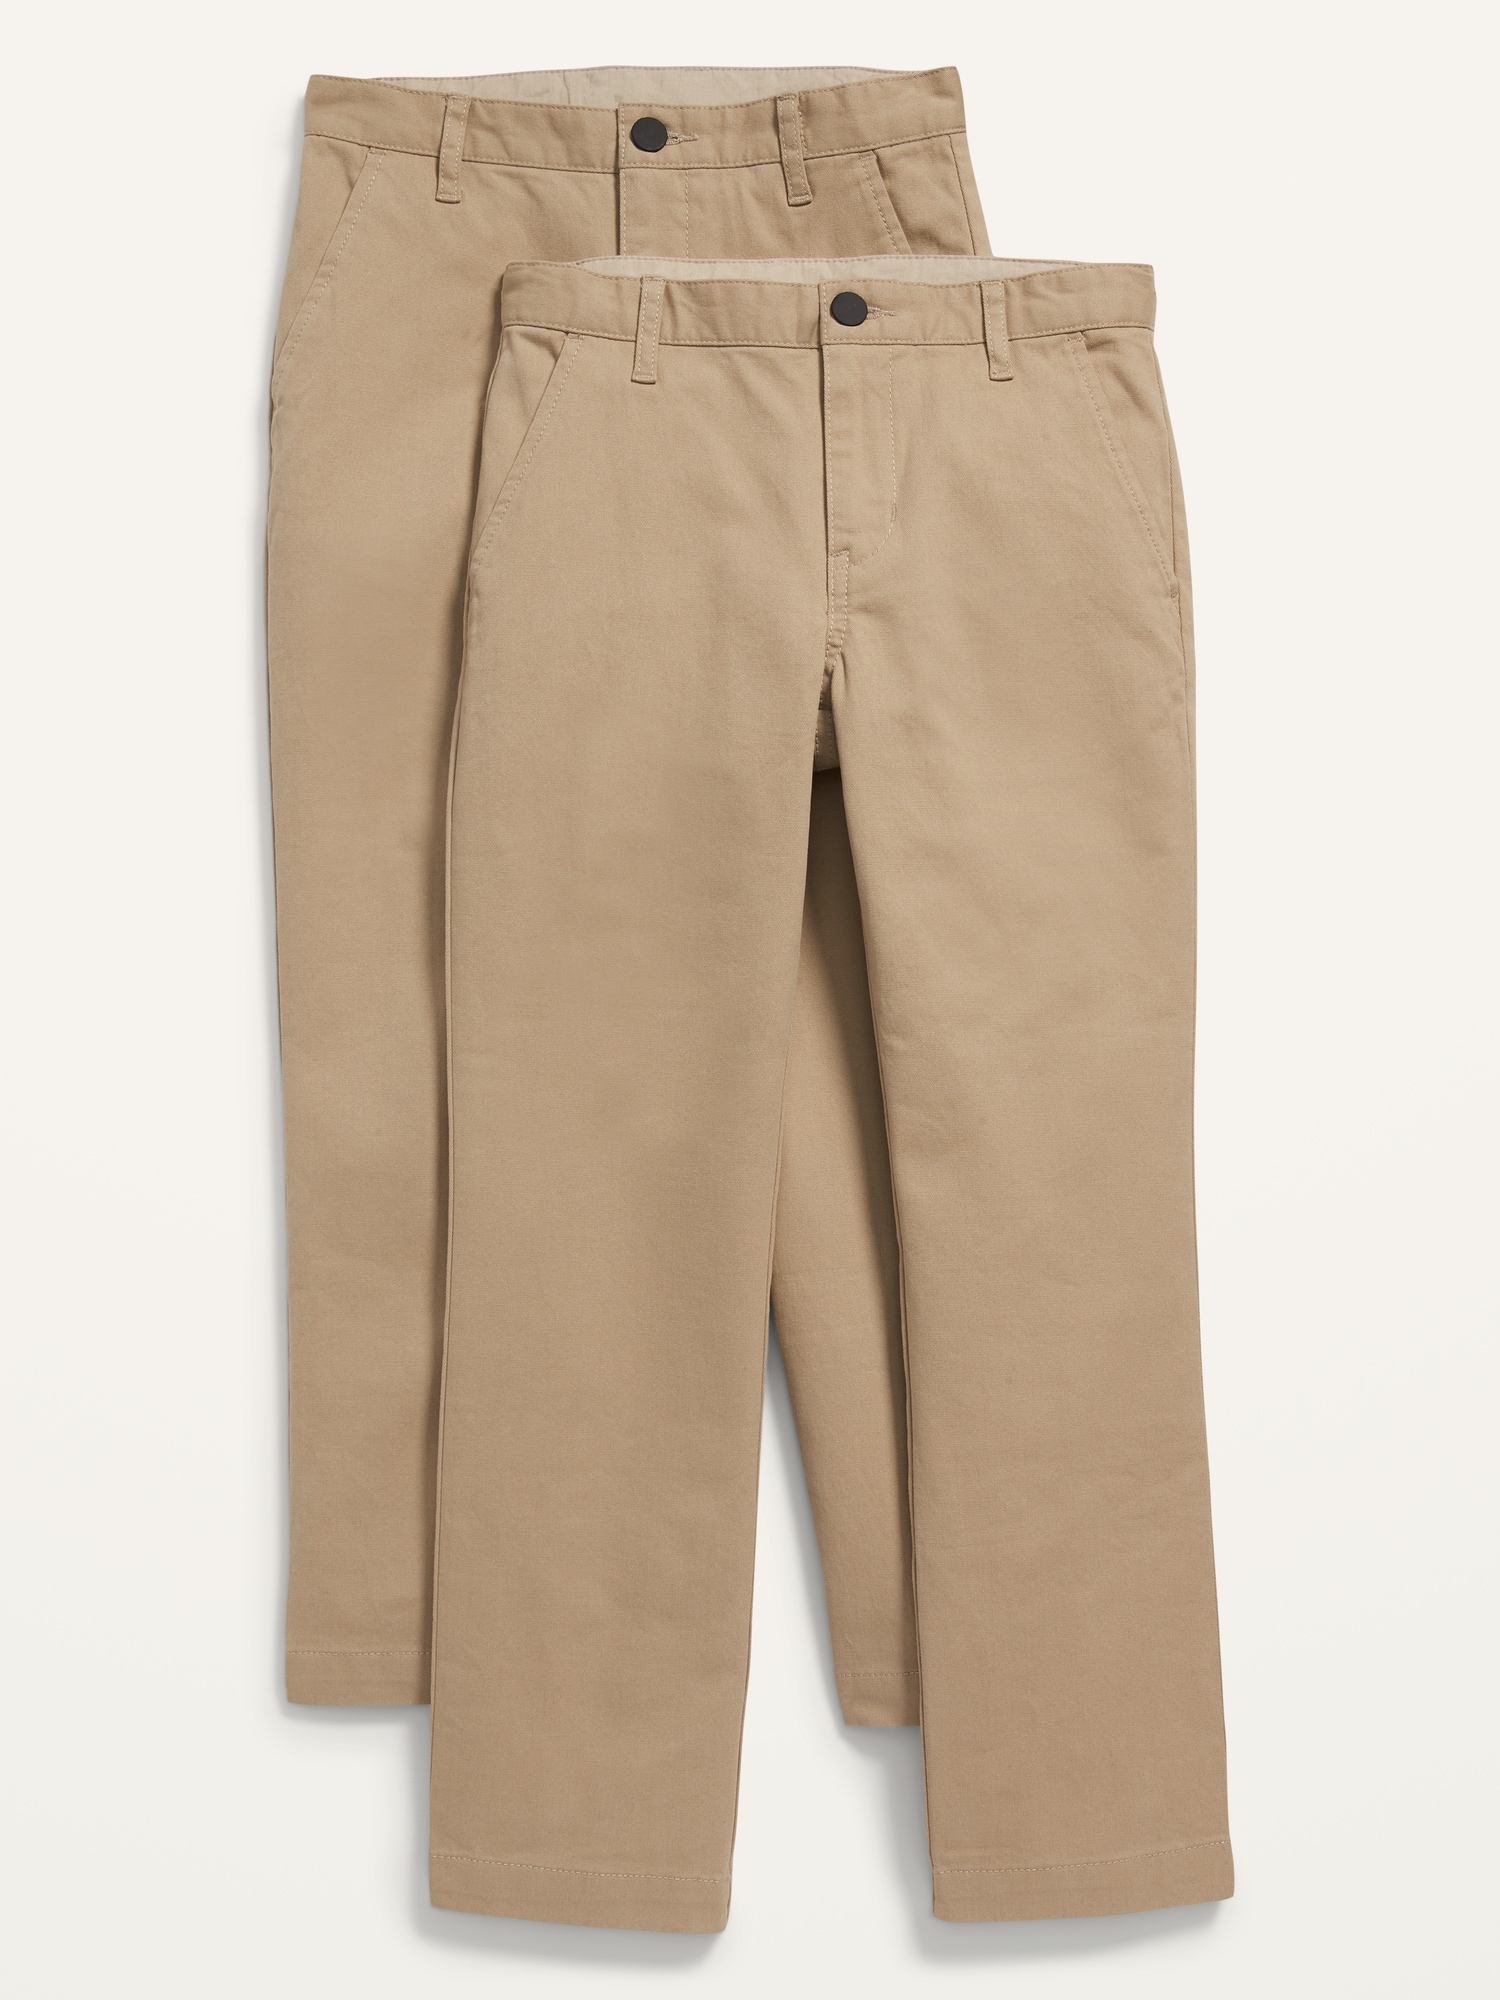 Old Navy Uniform Skinny Built-In Flex Chino Pants 2-Pack for Boys beige. 1